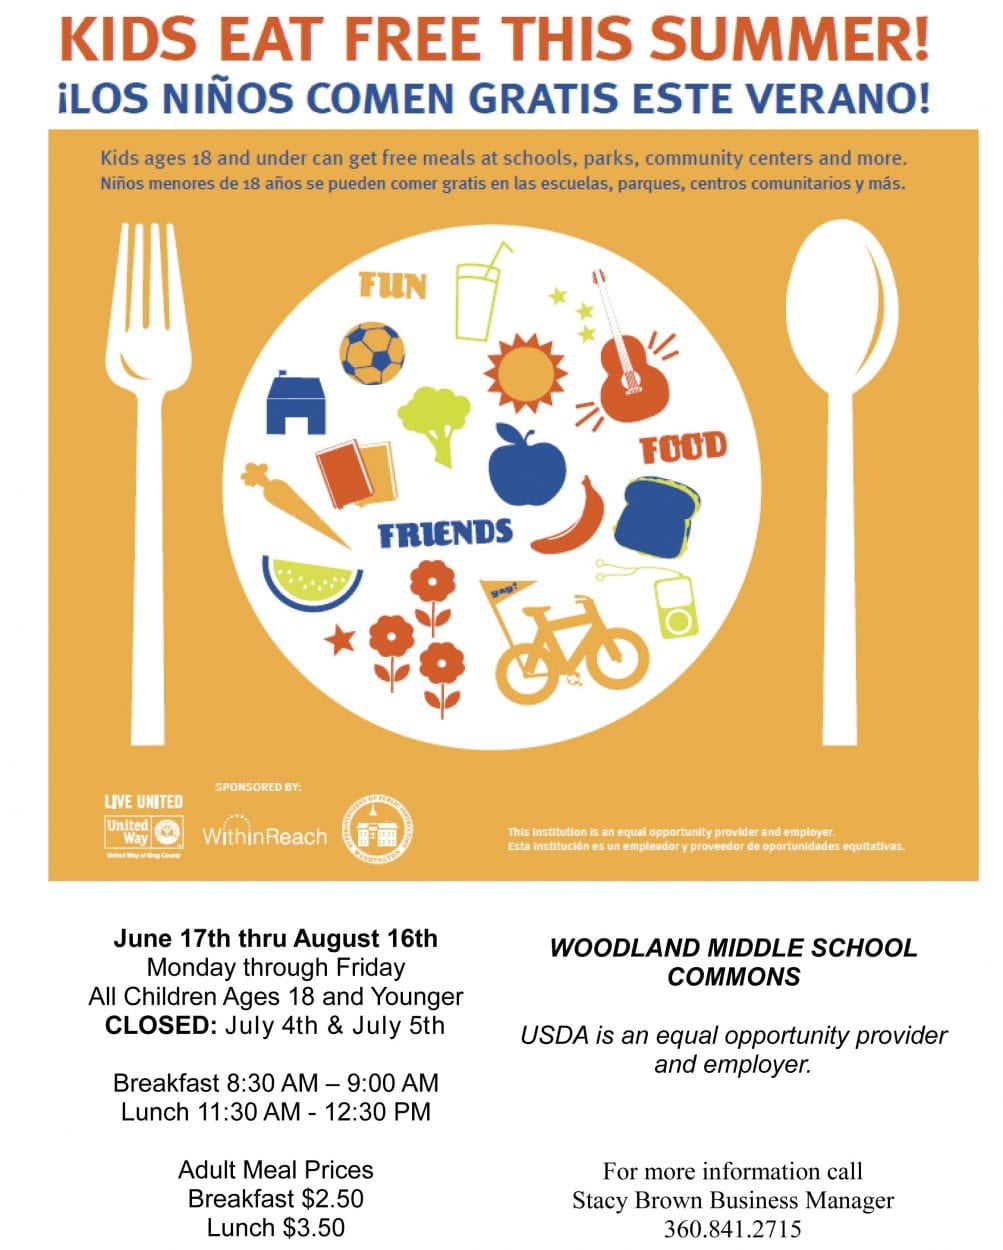 Community support and local grants help Woodland Public Schools offer free summer meals and backpacks